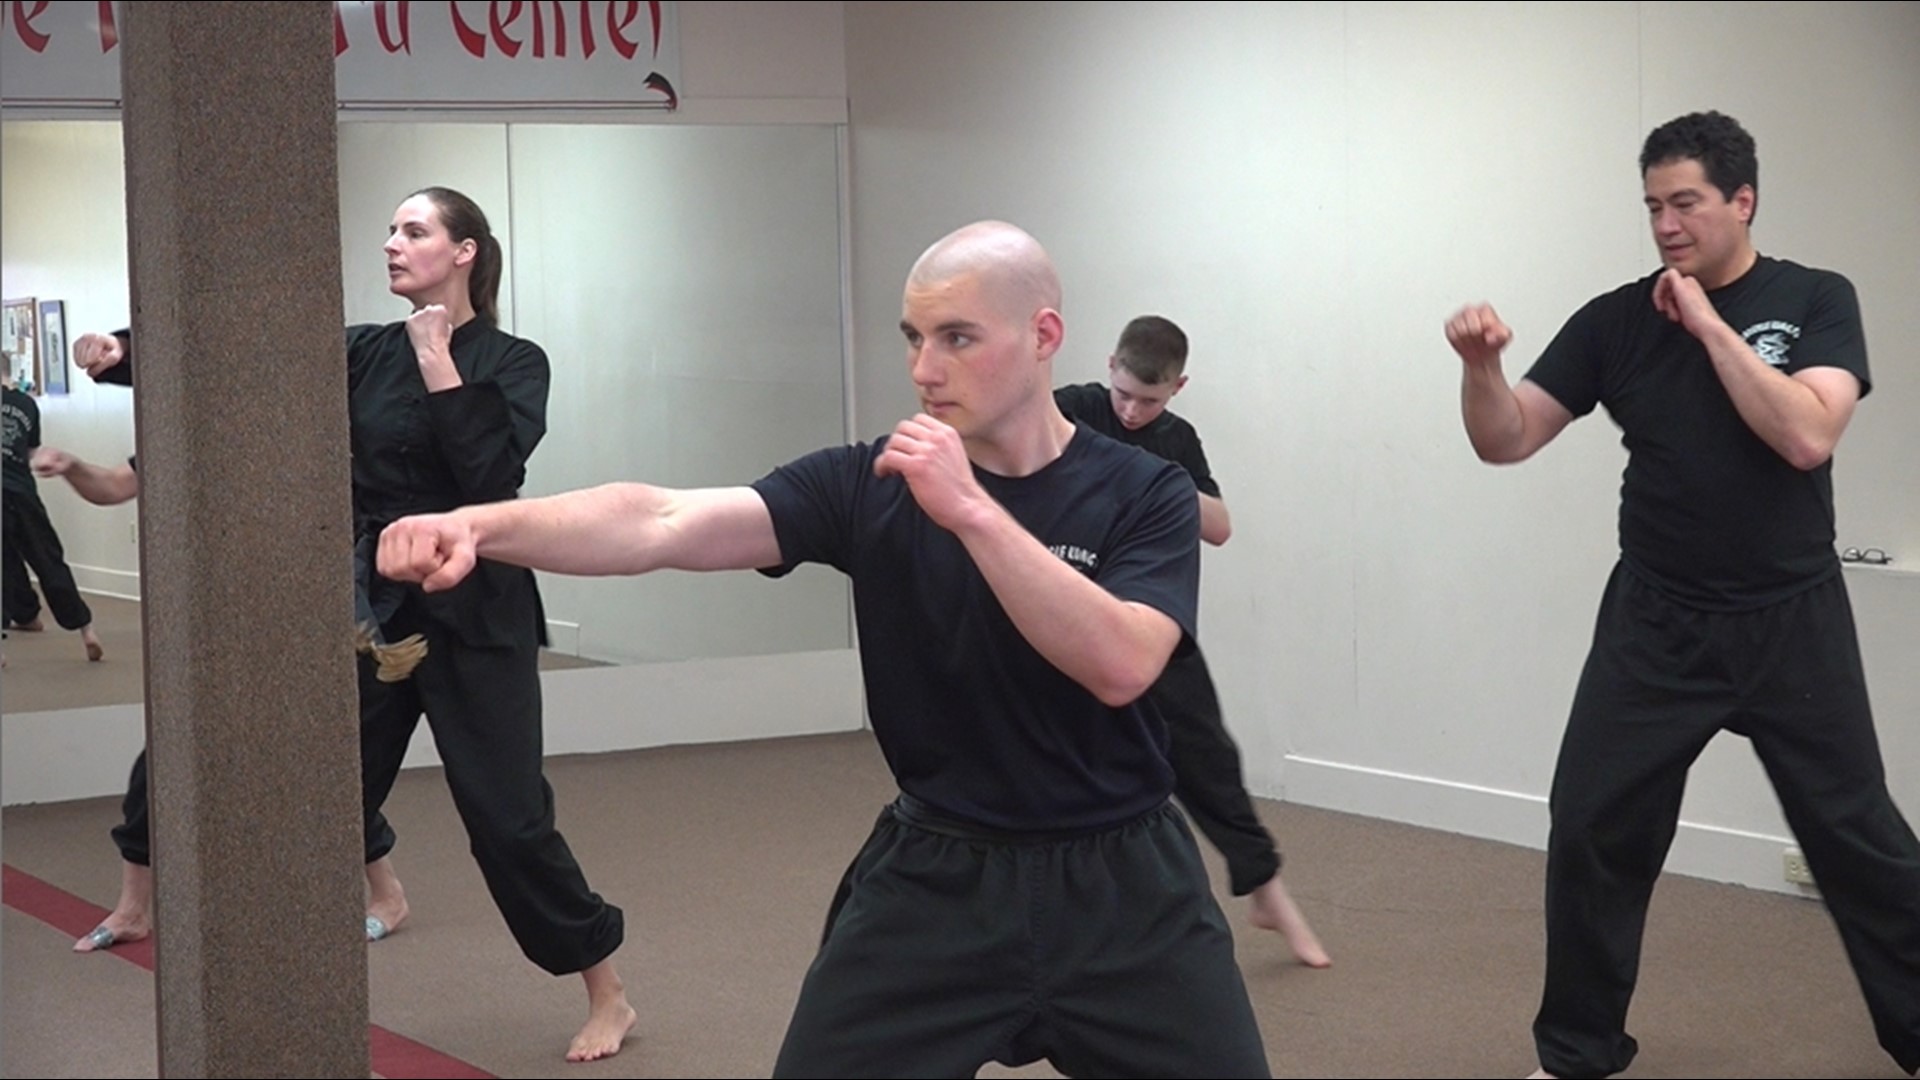 Meditation, self-defense and traditional Kata are all wrapped up into one practice at The Carlisle Kung Fu Center!